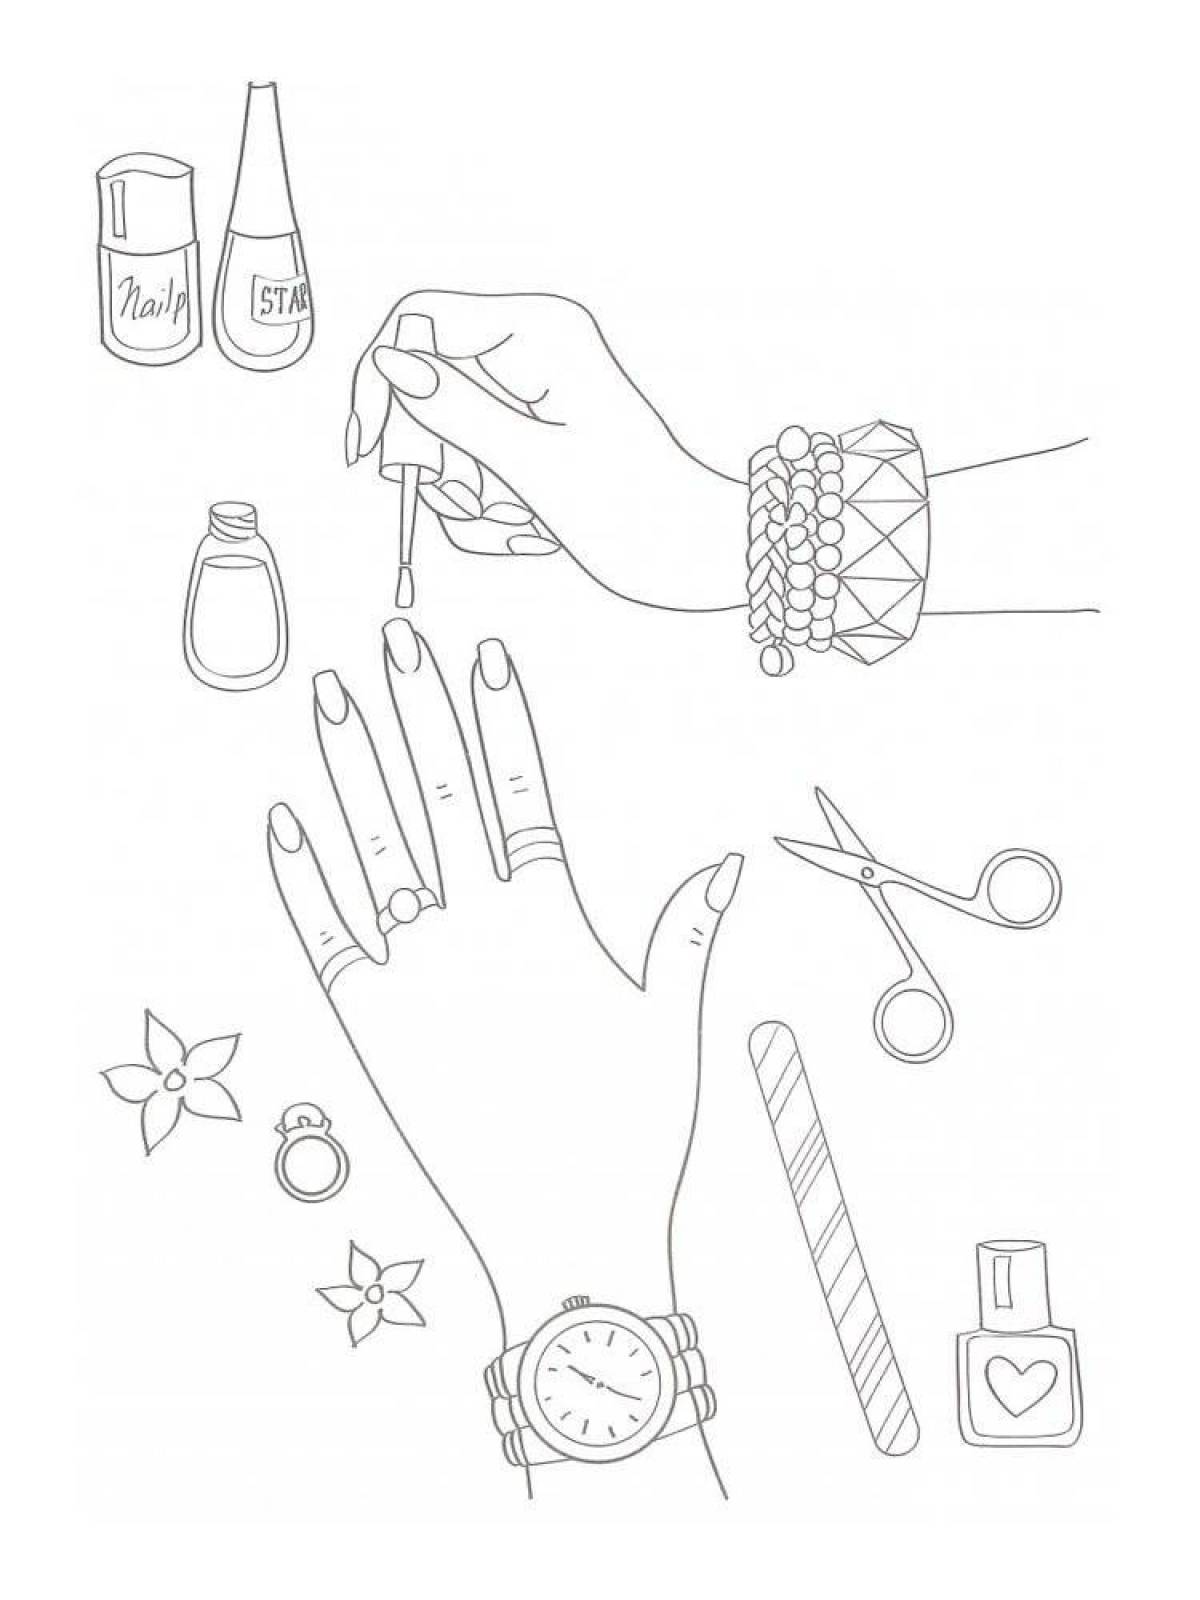 Coloring book magic hand with nails